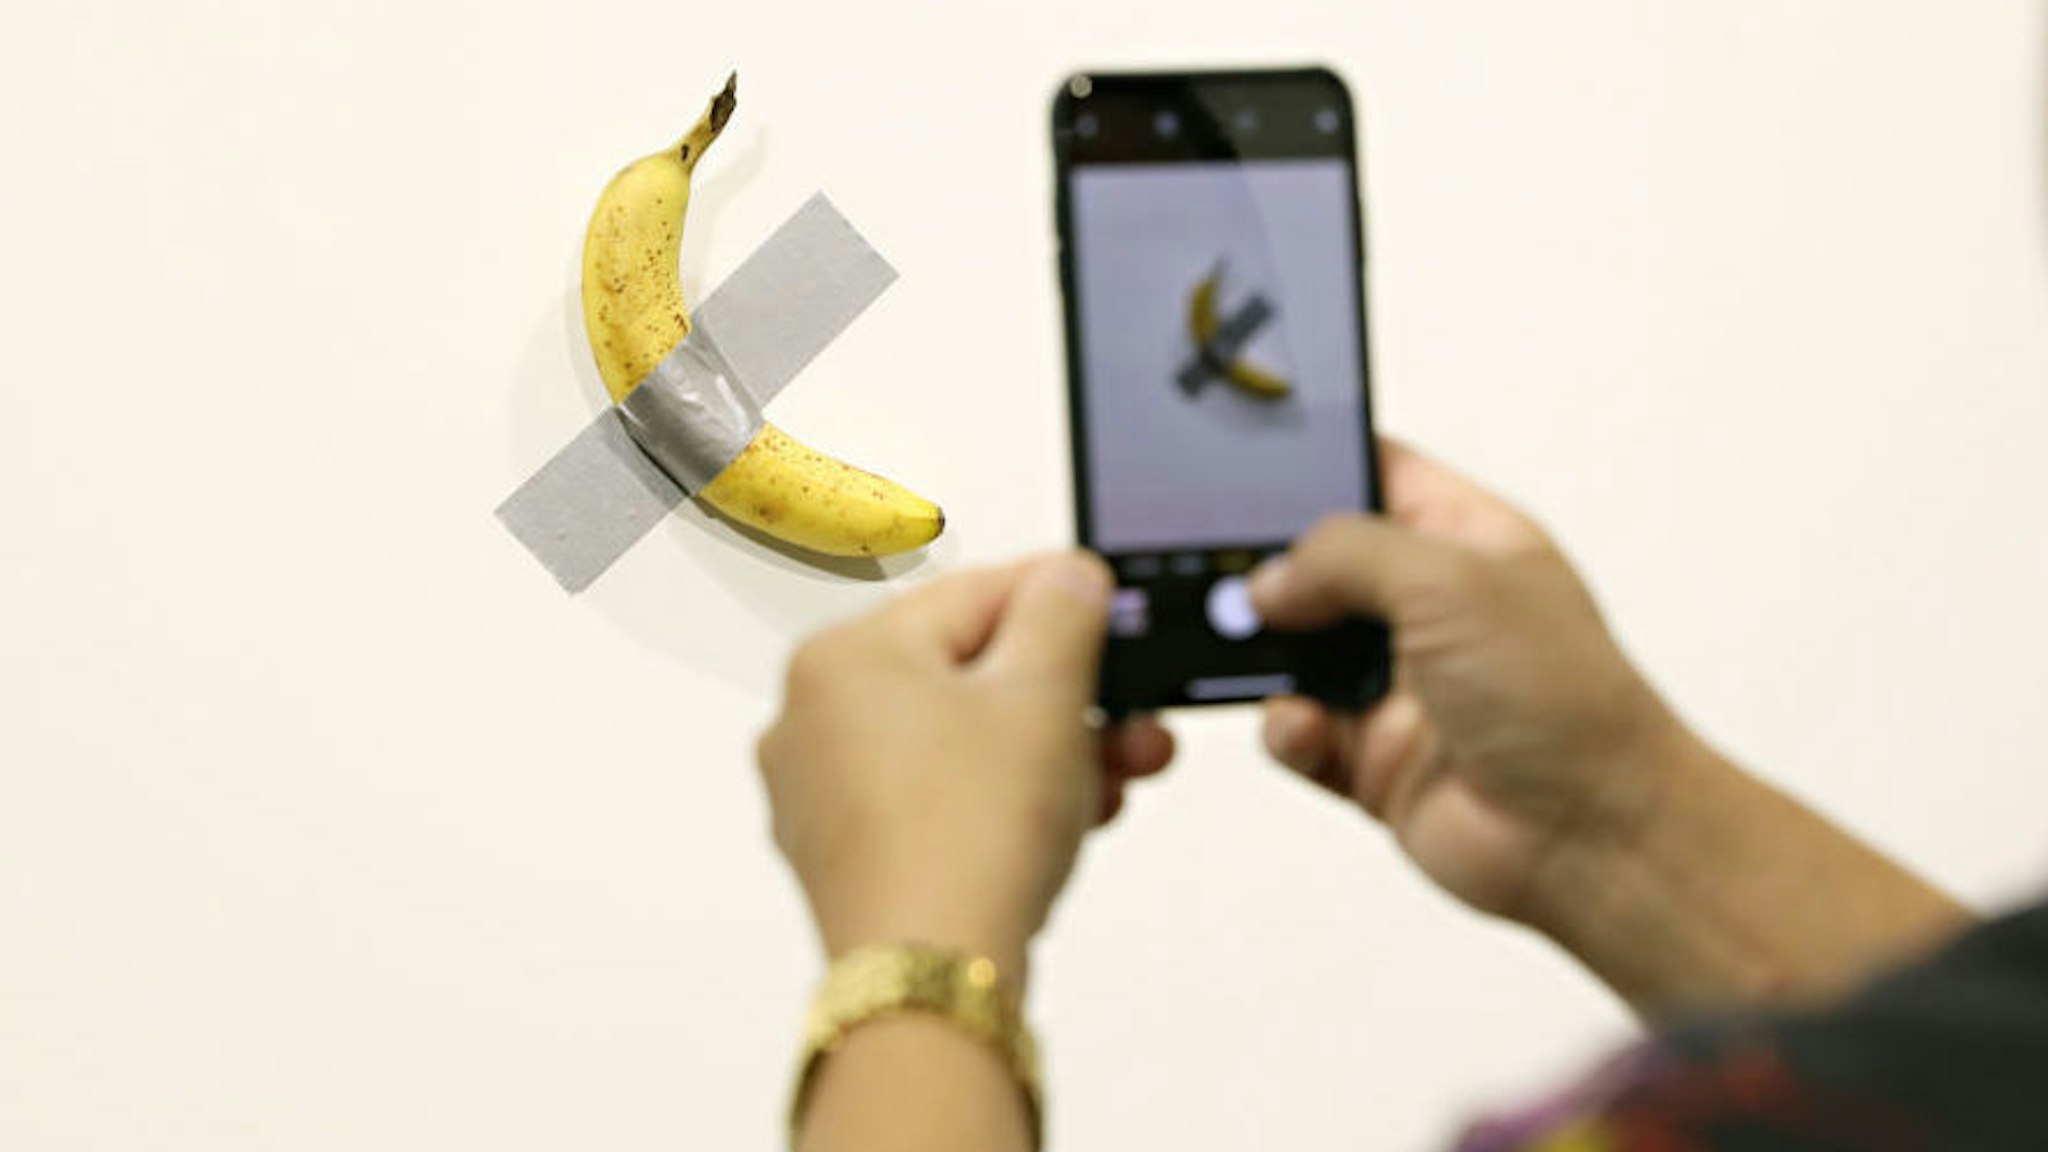 Maurizio Cattelan's "Comedian" presented by Perrotin Gallery and on view at Art Basel Miami 2019 at Miami Beach Convention Center on December 6, 2019 in Miami Beach, Florida. Two of the three editions of the piece, which feature a banana duct-taped to a wall, have reportedly sold for $120,000.